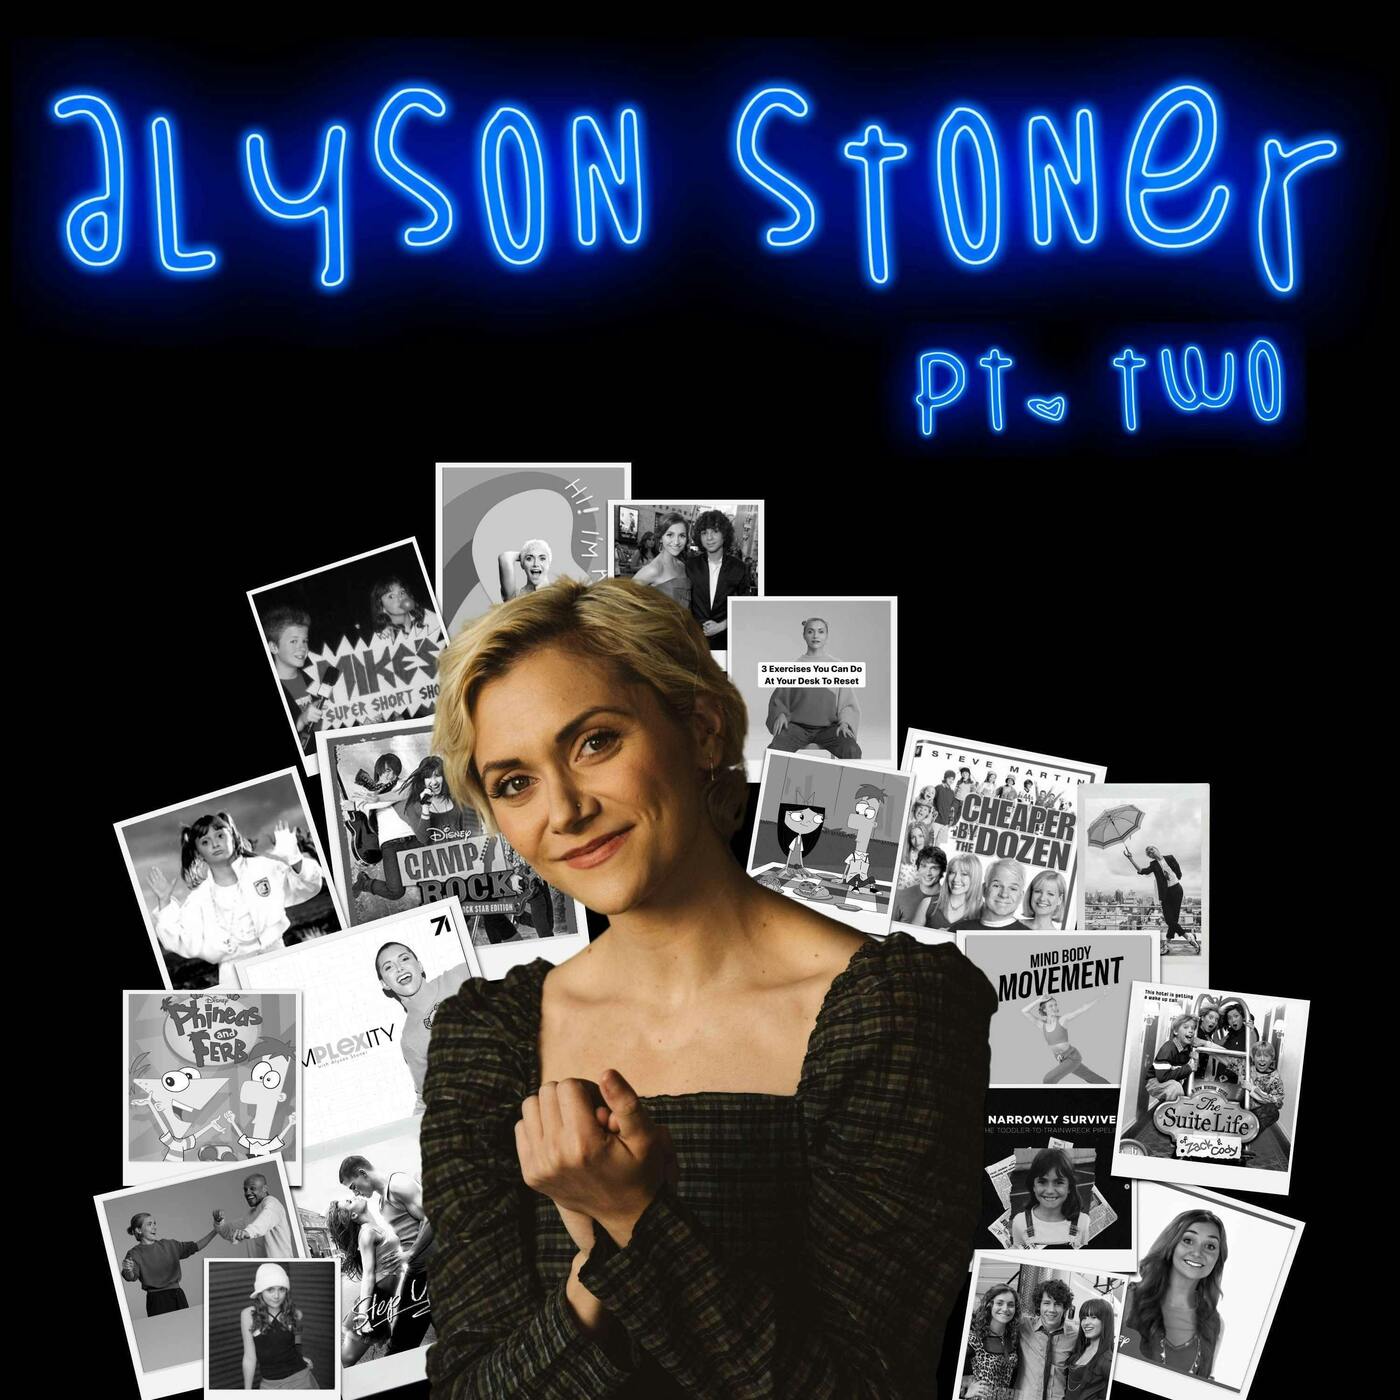 Vulnerable EP37: Actress Alyson Stoner Wants Congress To Protect Child Actors